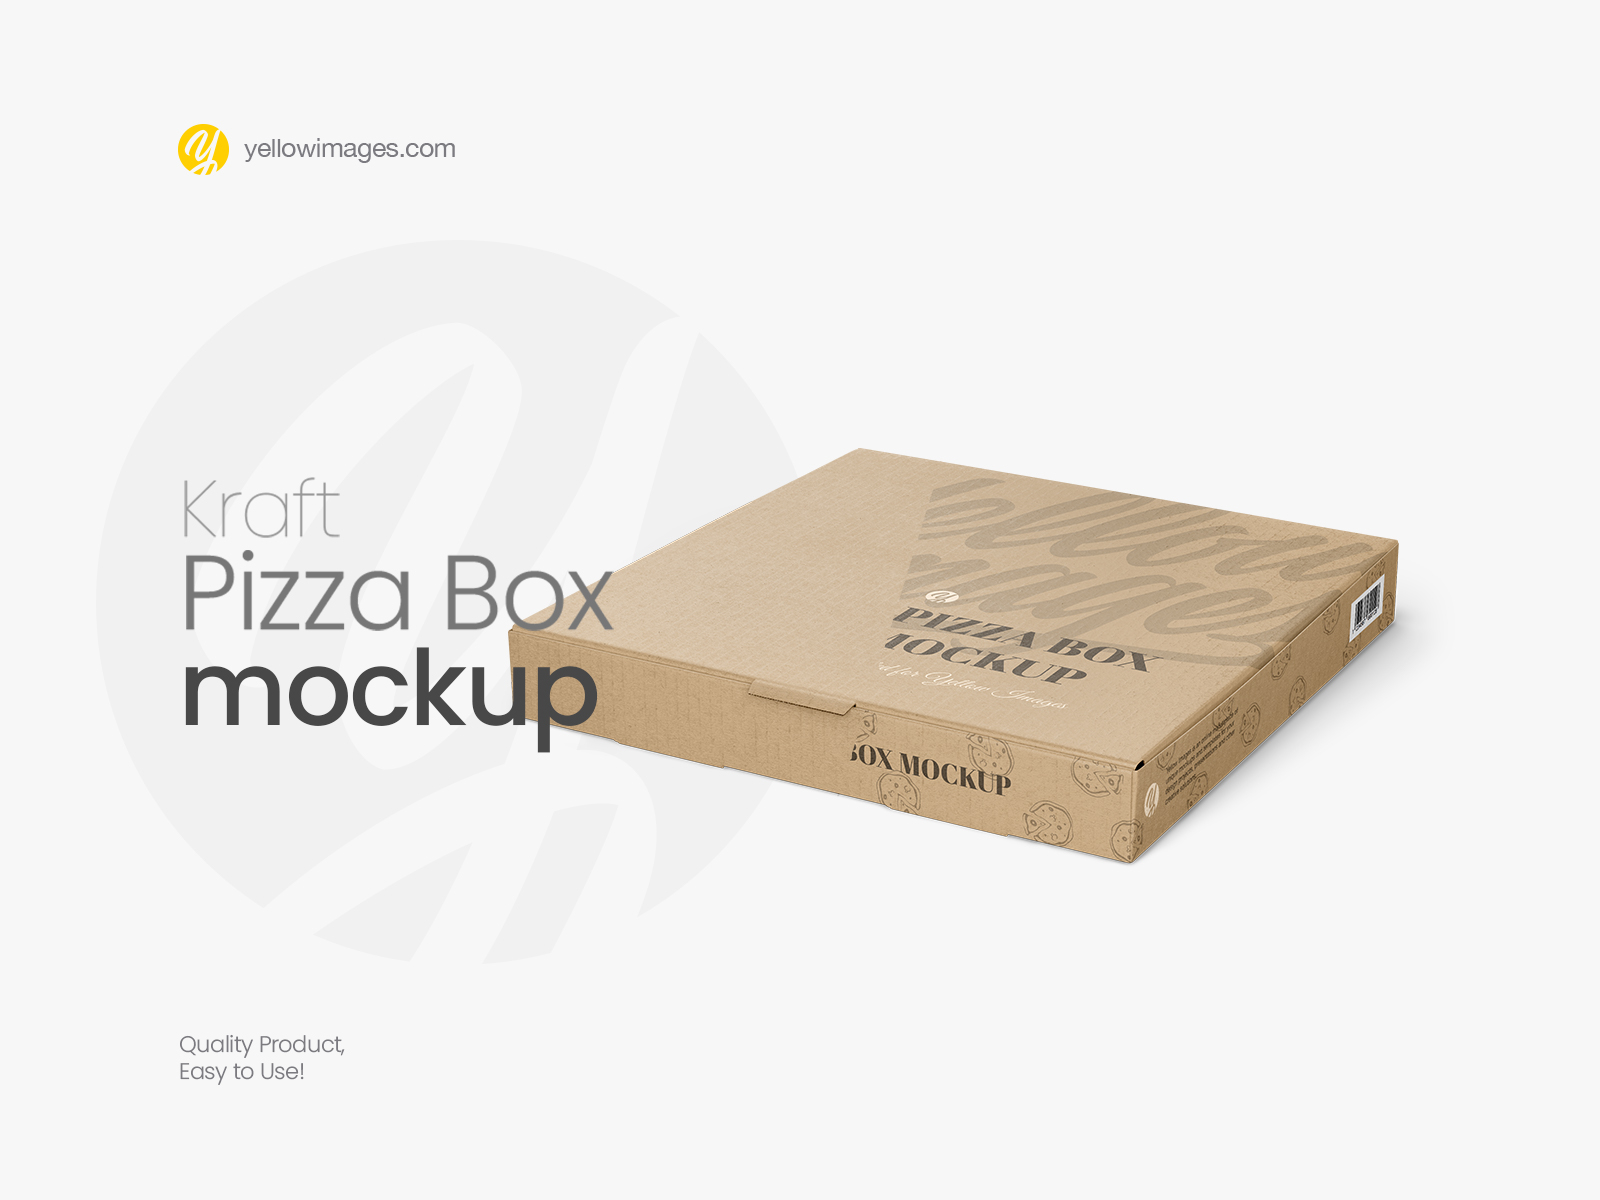 Download Packaging Mockup In Psd Download Free And Premium Packaging Mockup Psd Templates And Design Assets PSD Mockup Templates